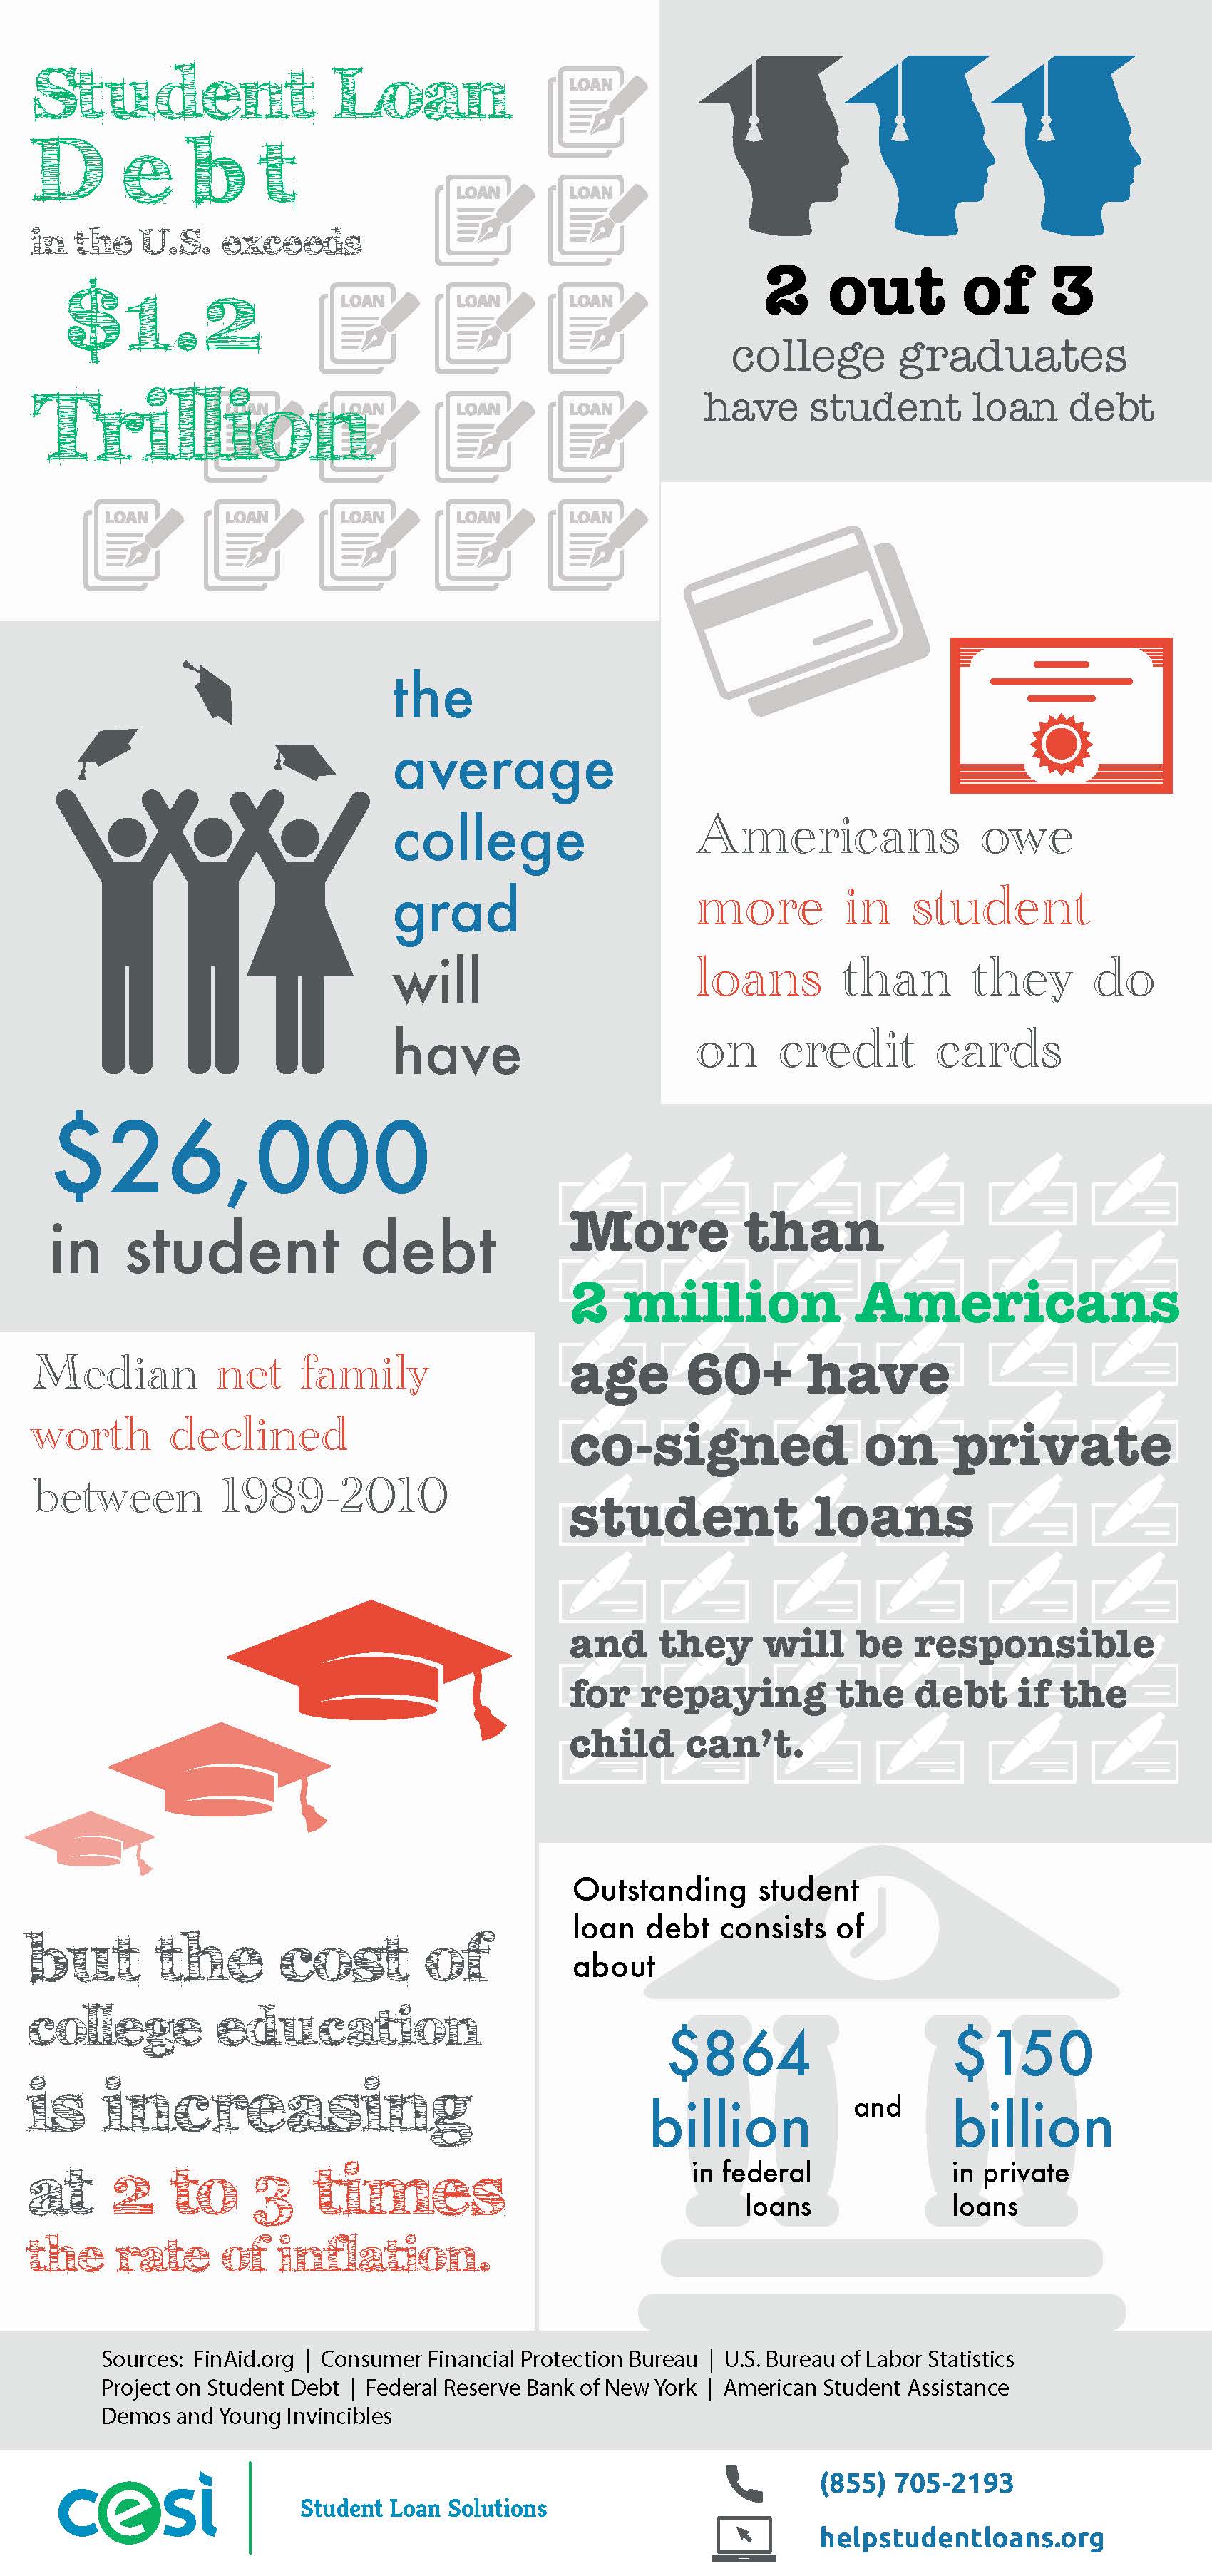 An infographic on student loan debt